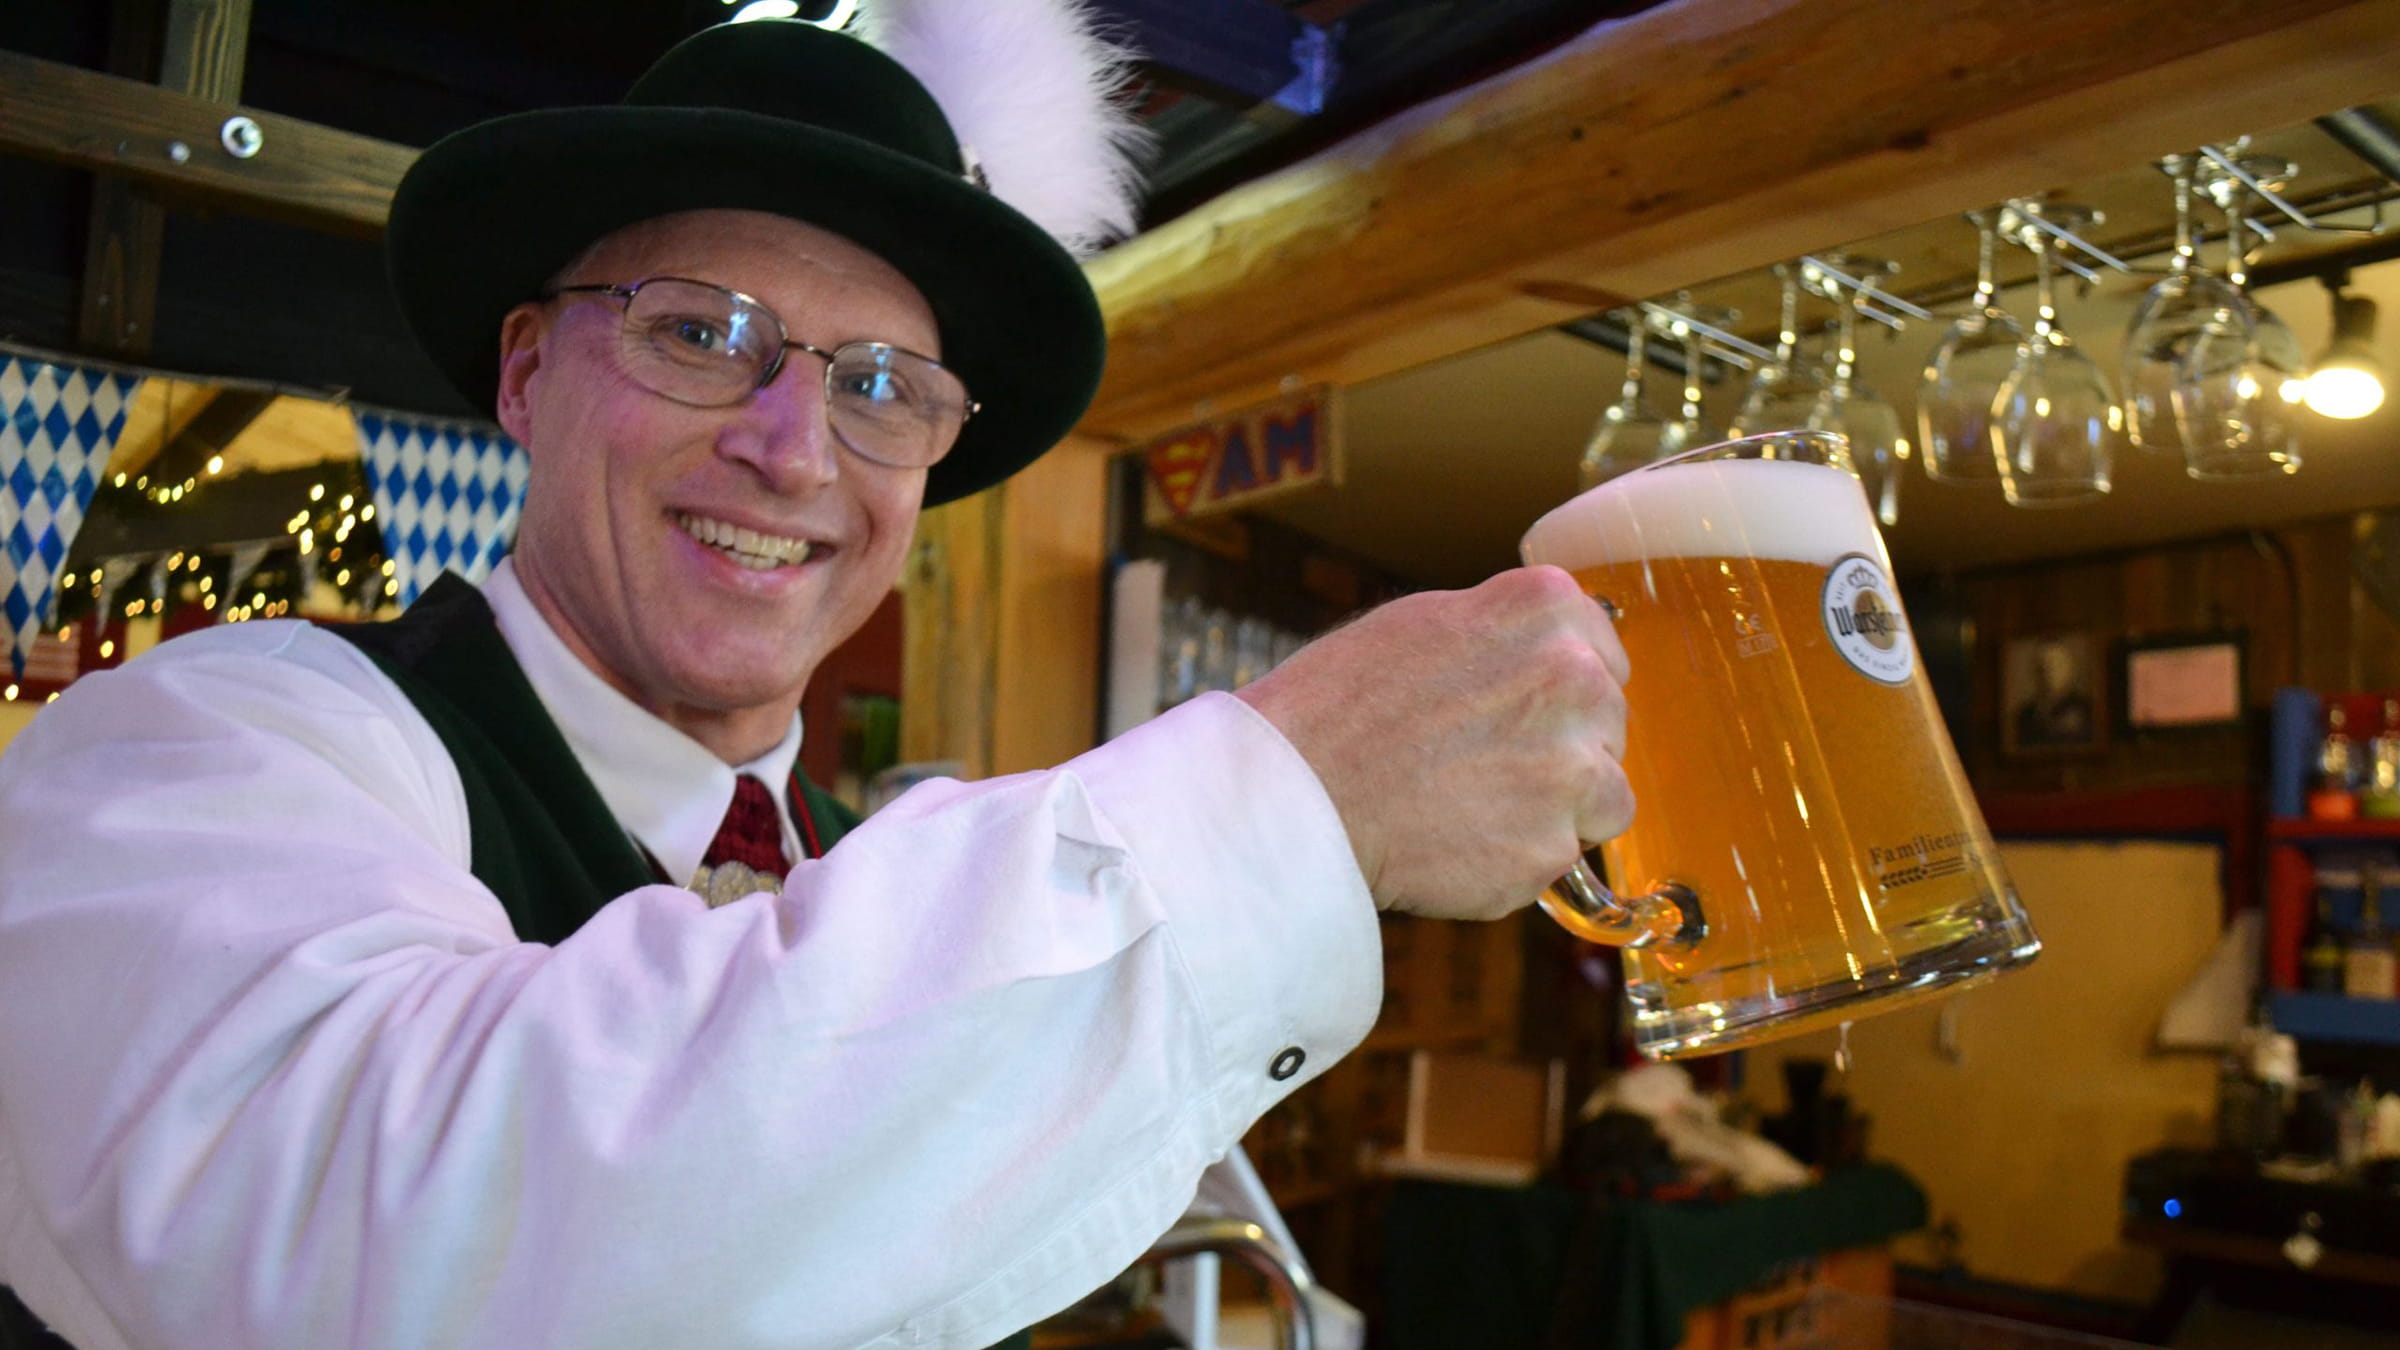 Guy wearing a black hat, holding up a beer stein filled with beer